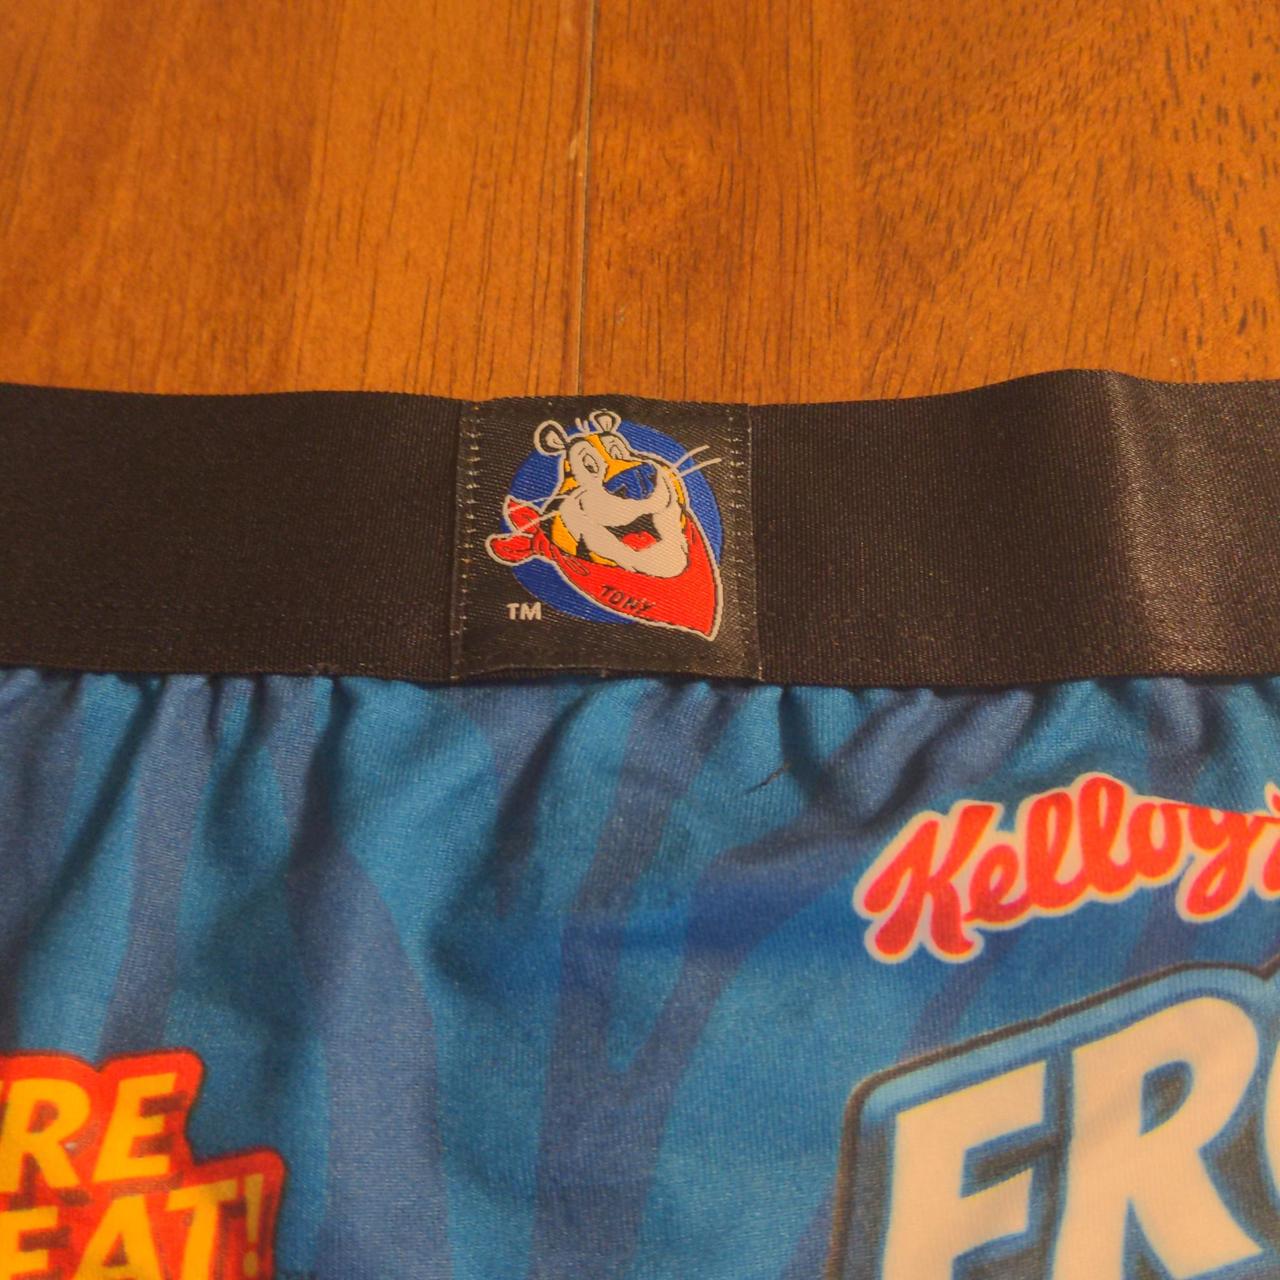 Swag boxer briefs. Frosted Flakes novelty boxer - Depop